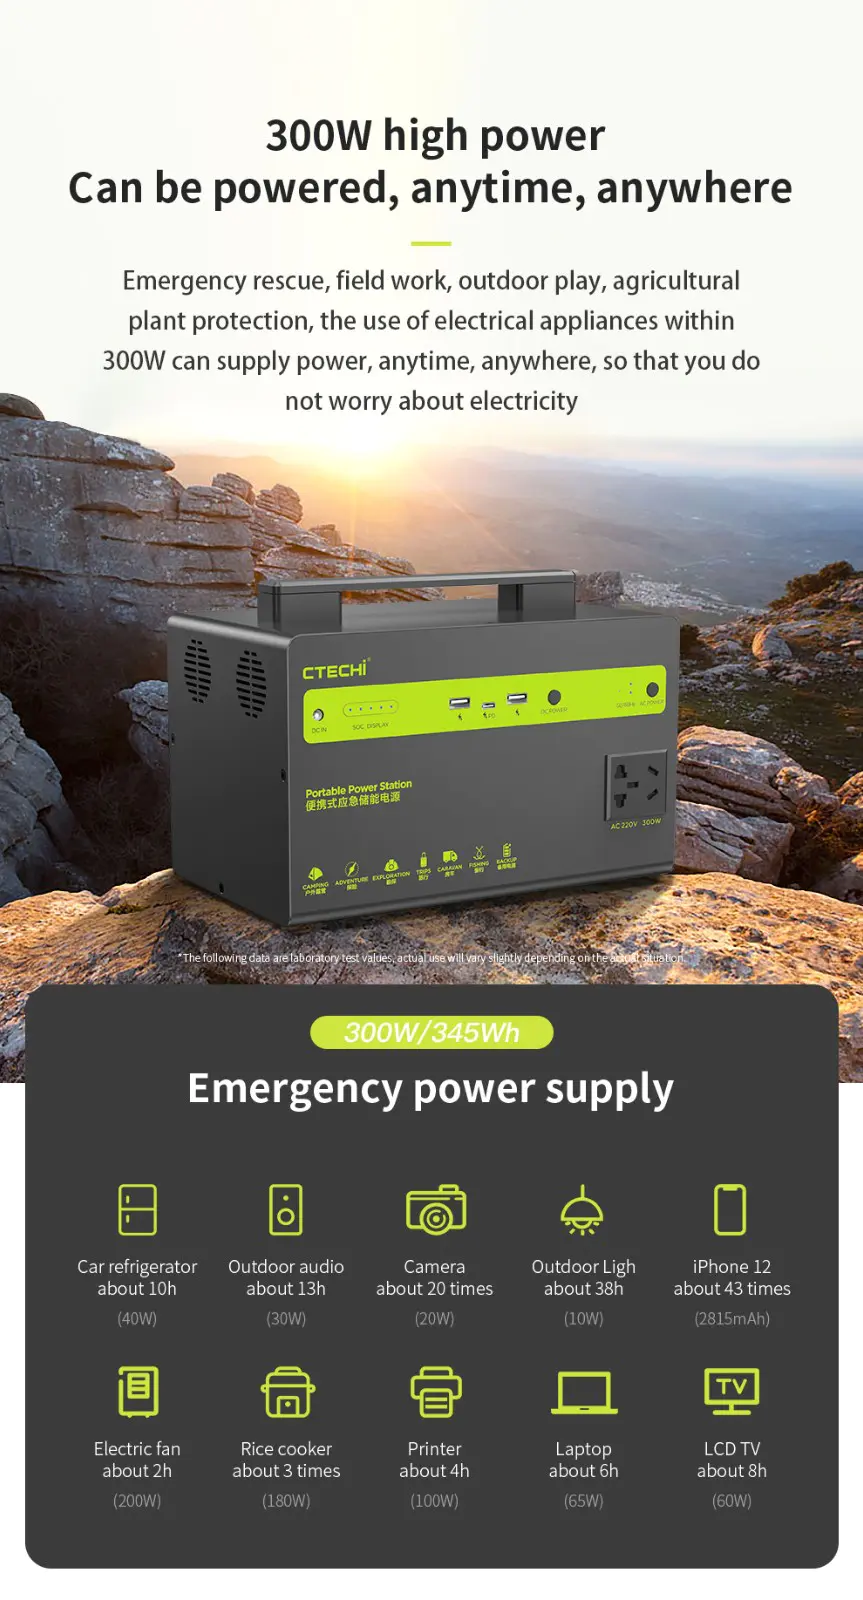 CTECHi stable lithium portable power station customized for commercial